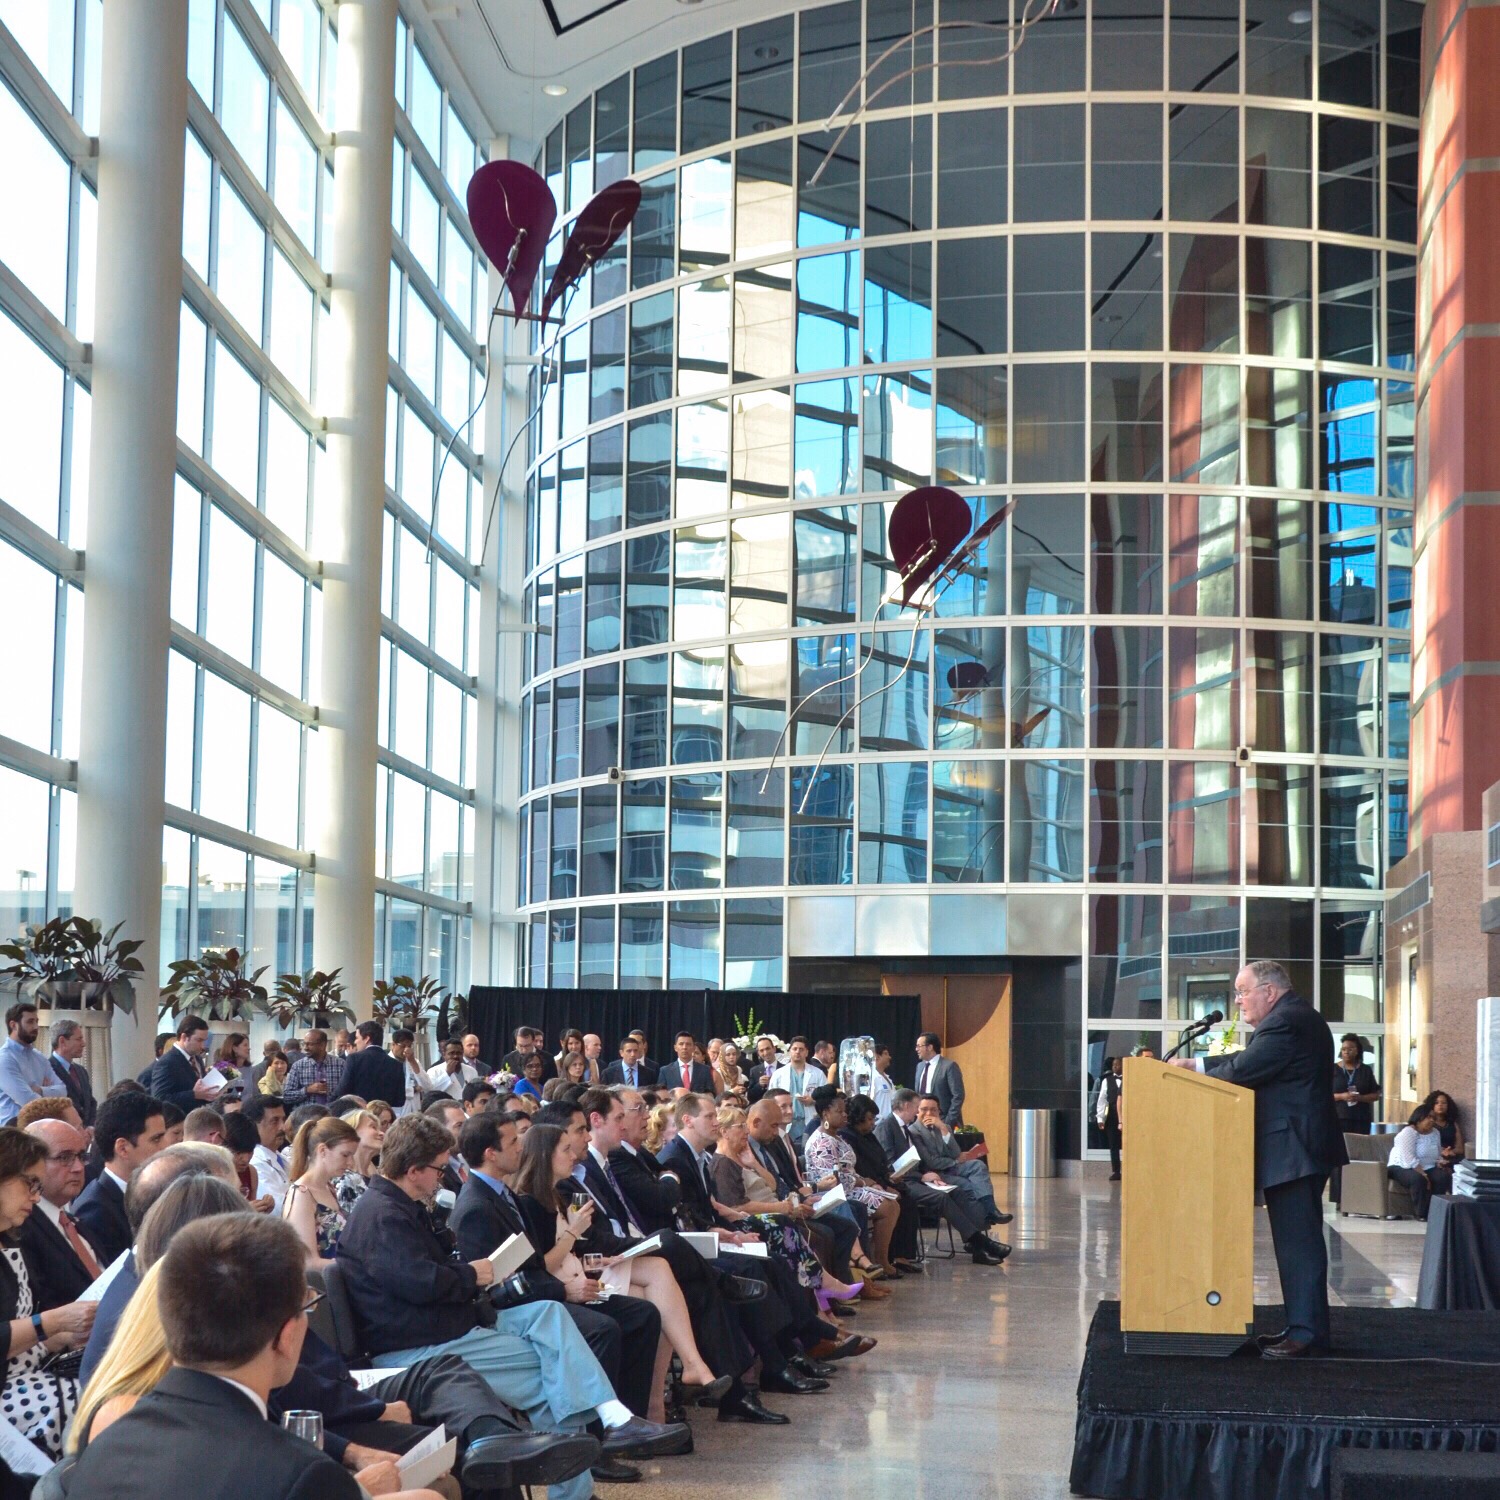 2018 Texas Heart Institute Honors Ceremony Graduation of Fellows, The Ansary Atrium at the Denton A. Cooley Building May 11, 2018